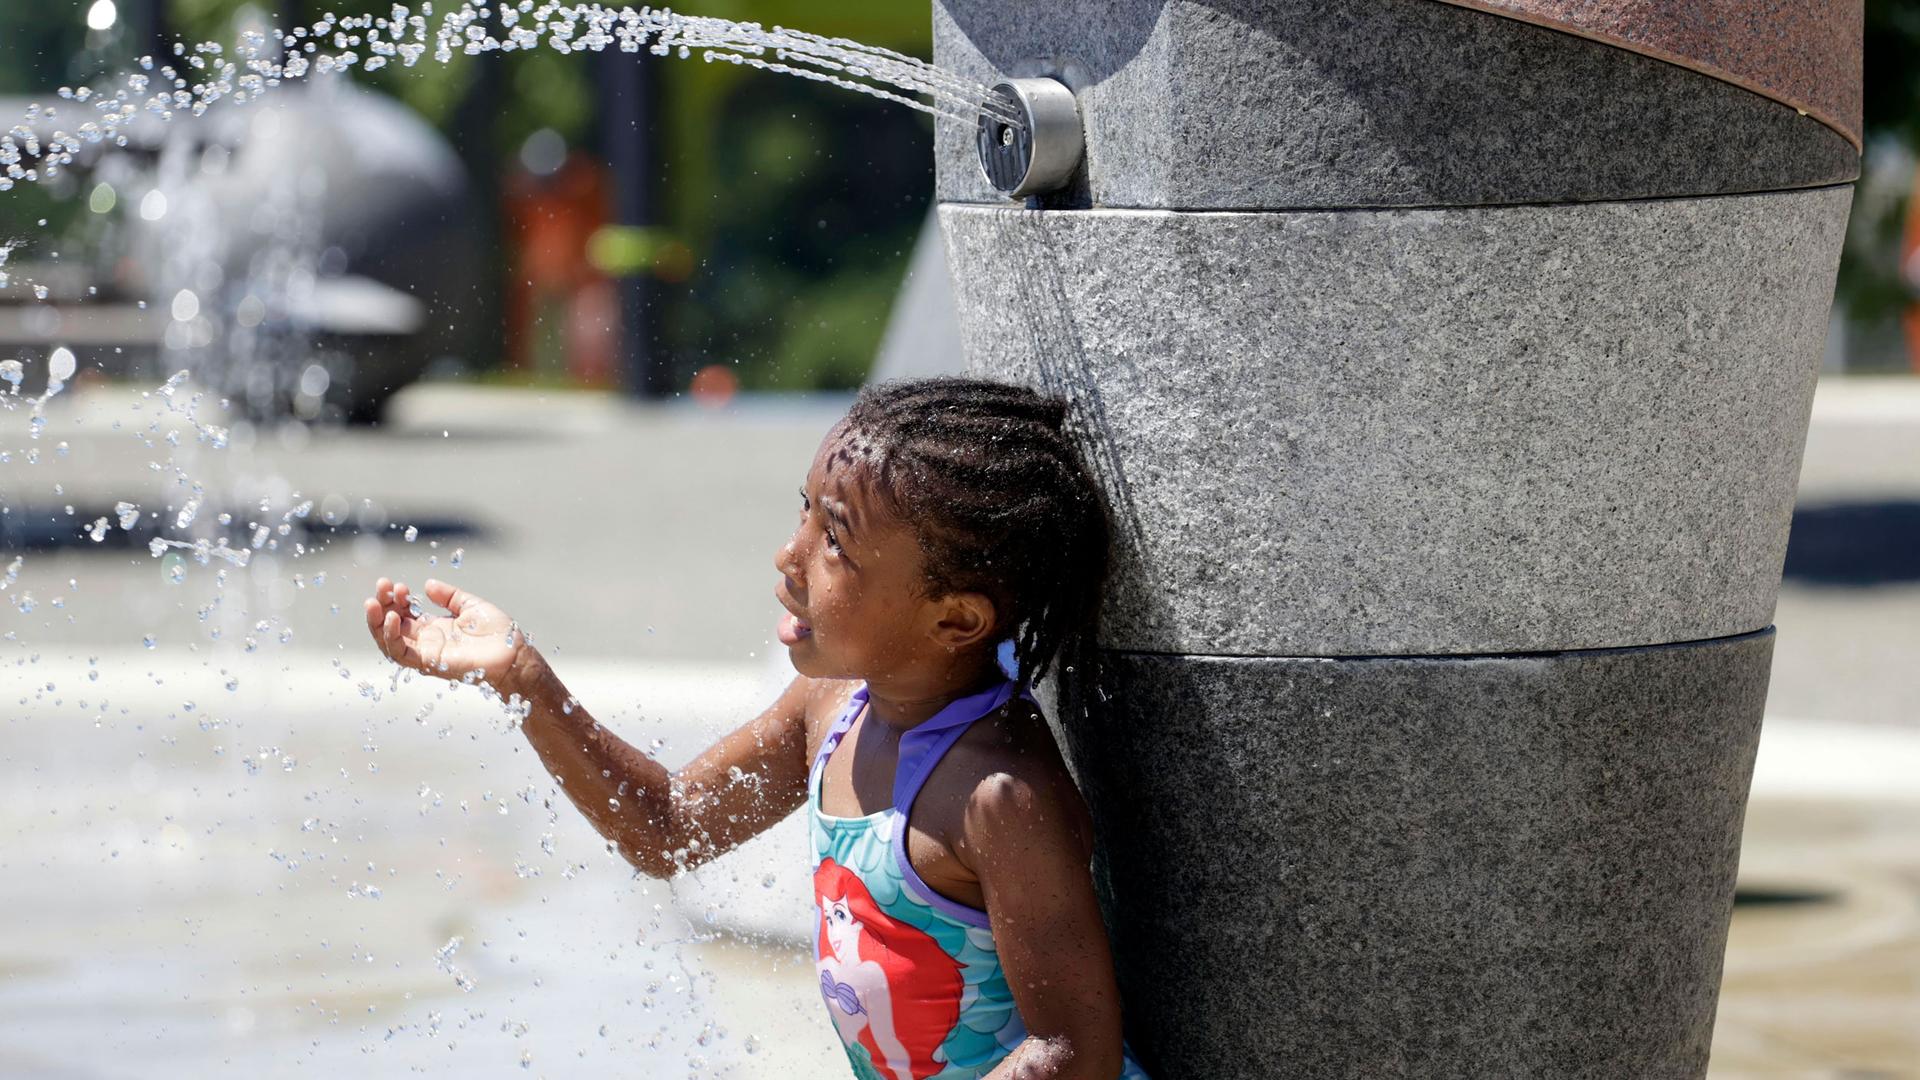 A young girl is shown leaning up against a stone column spraying a stream of water.